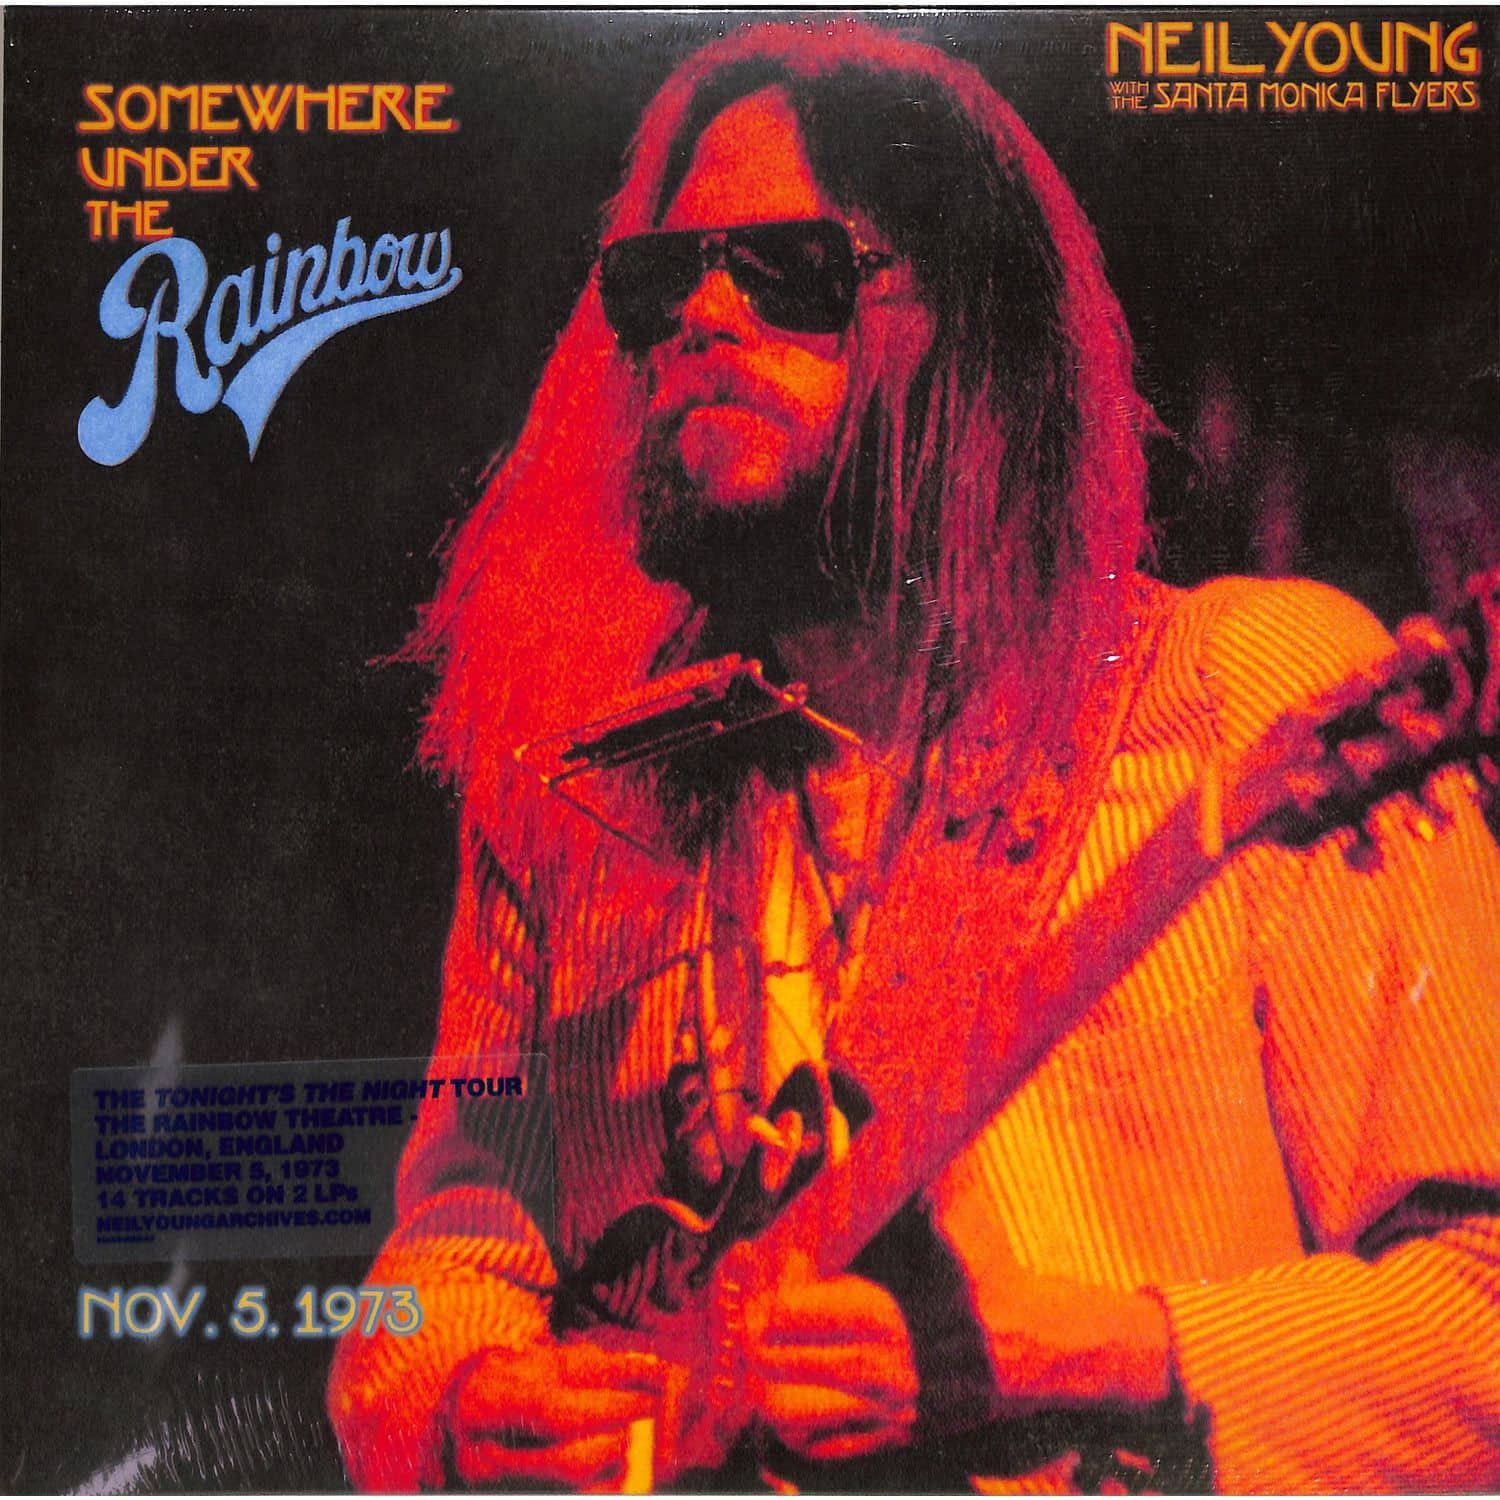 Neil Young with the Santa Monica Flyers - SOMEWHERE UNDER THE RAINBOW 1973 